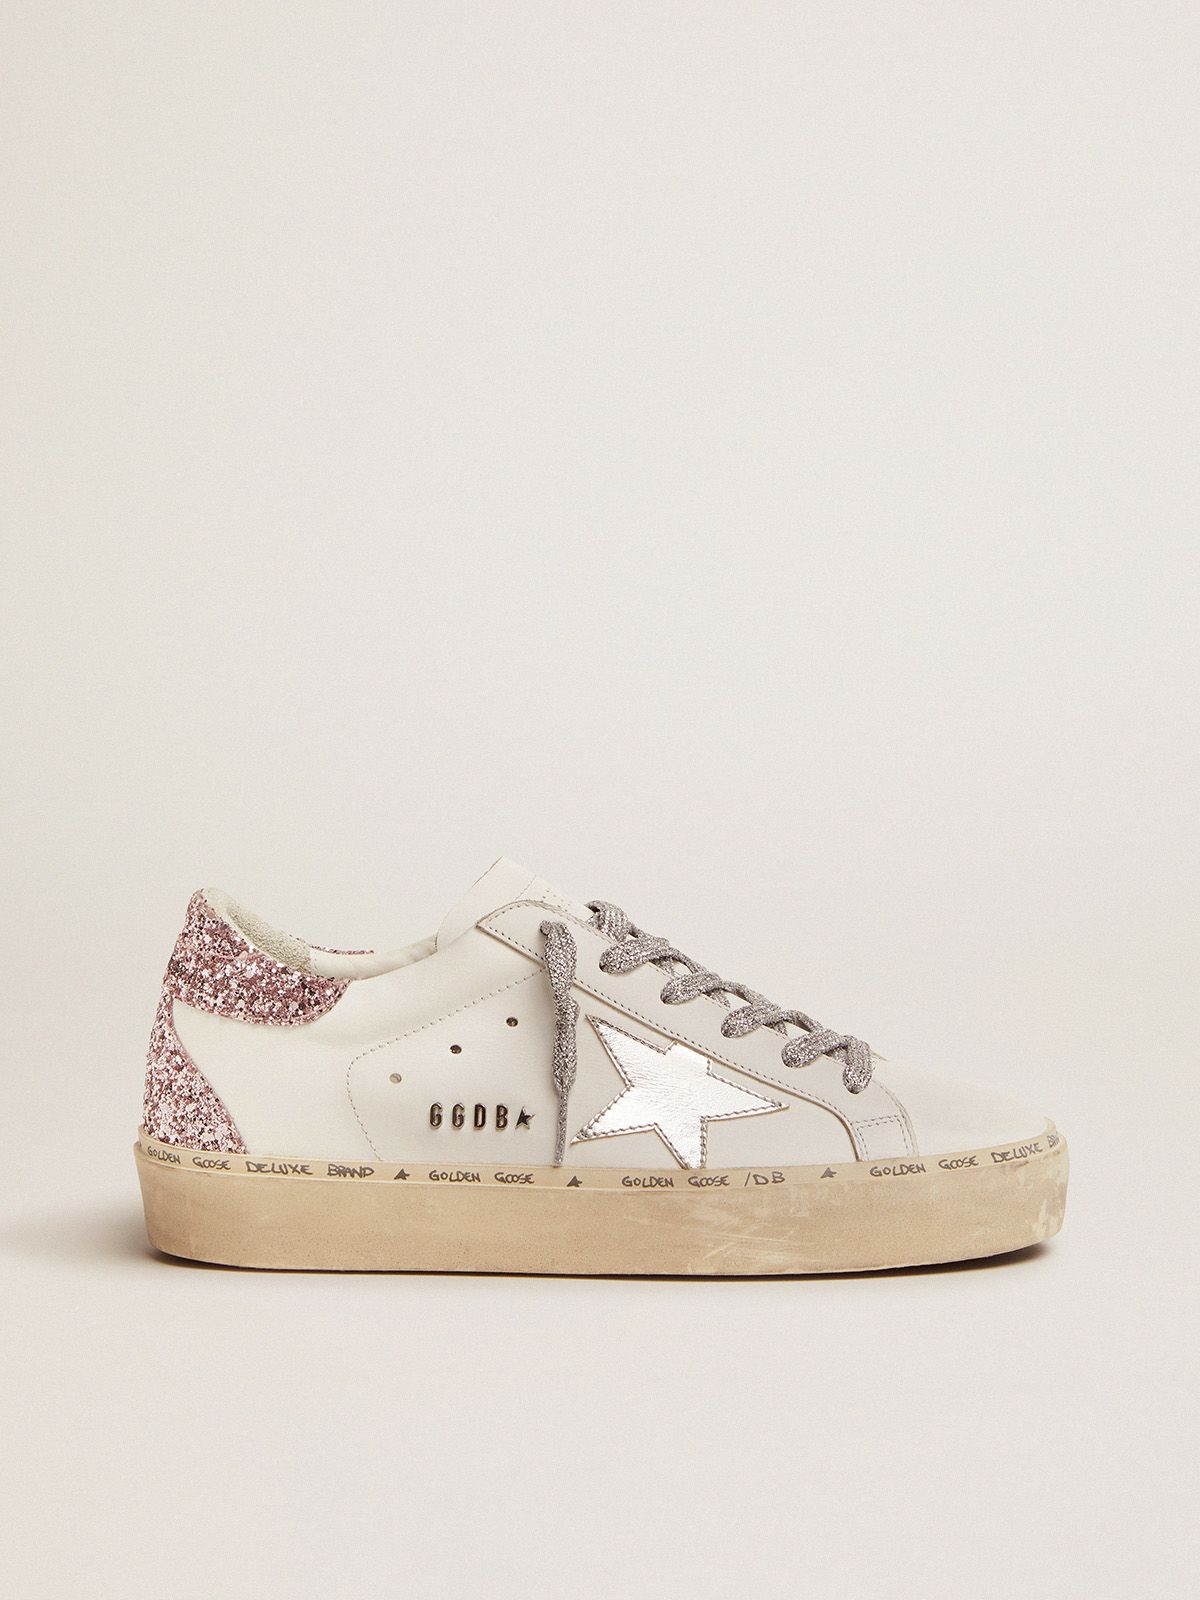 golden goose star and heel sneakers glitter leather tab laminated quartz-pink silver Hi Star with